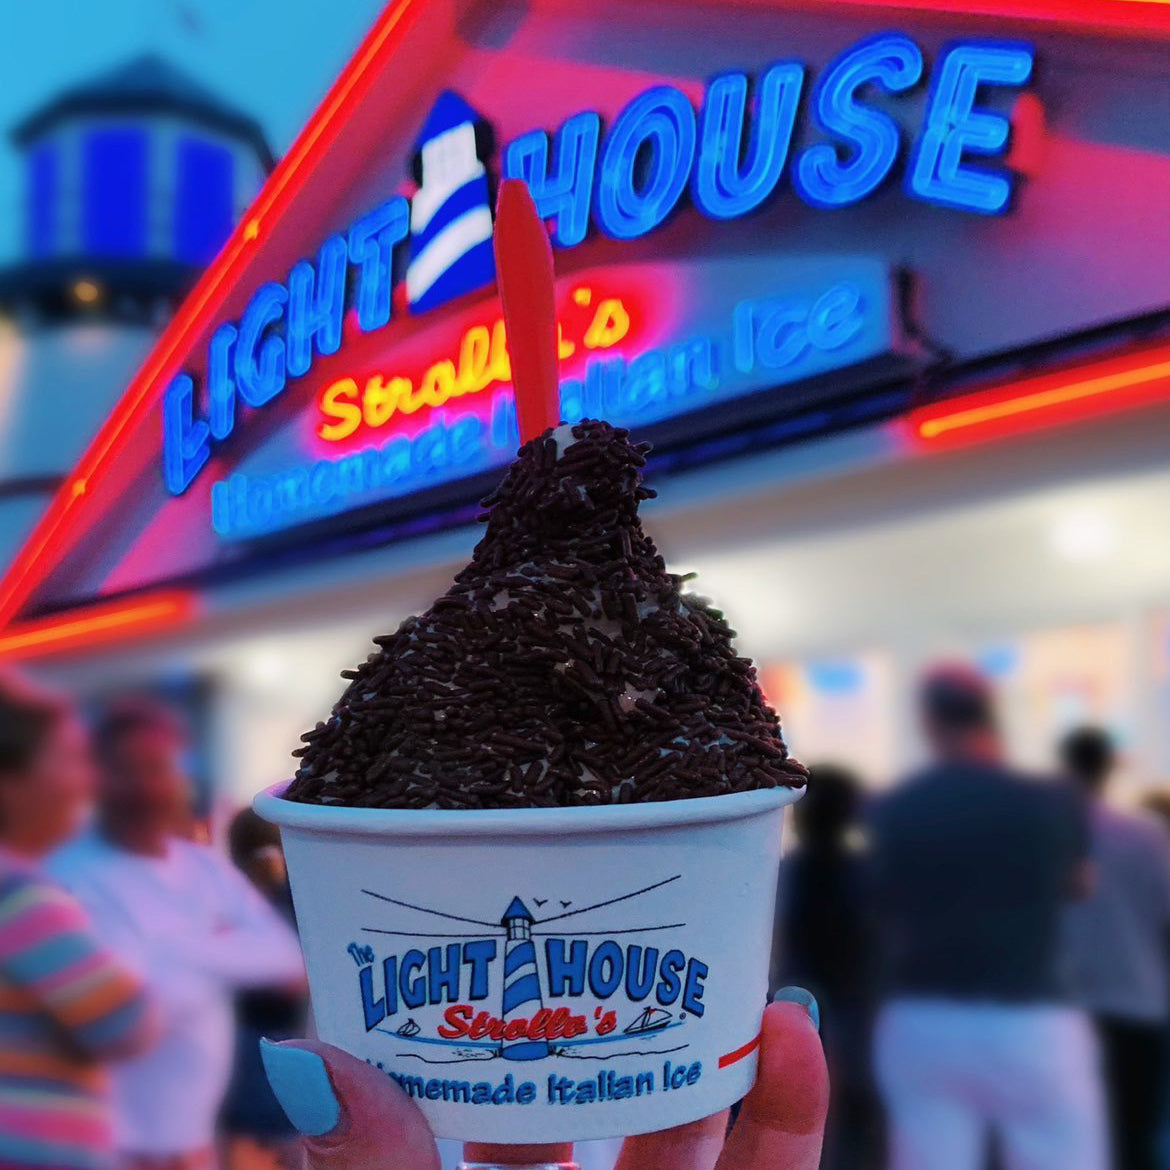 A Strollo's Lighthouse soft serve ice cream cup with chocolate sprinkles